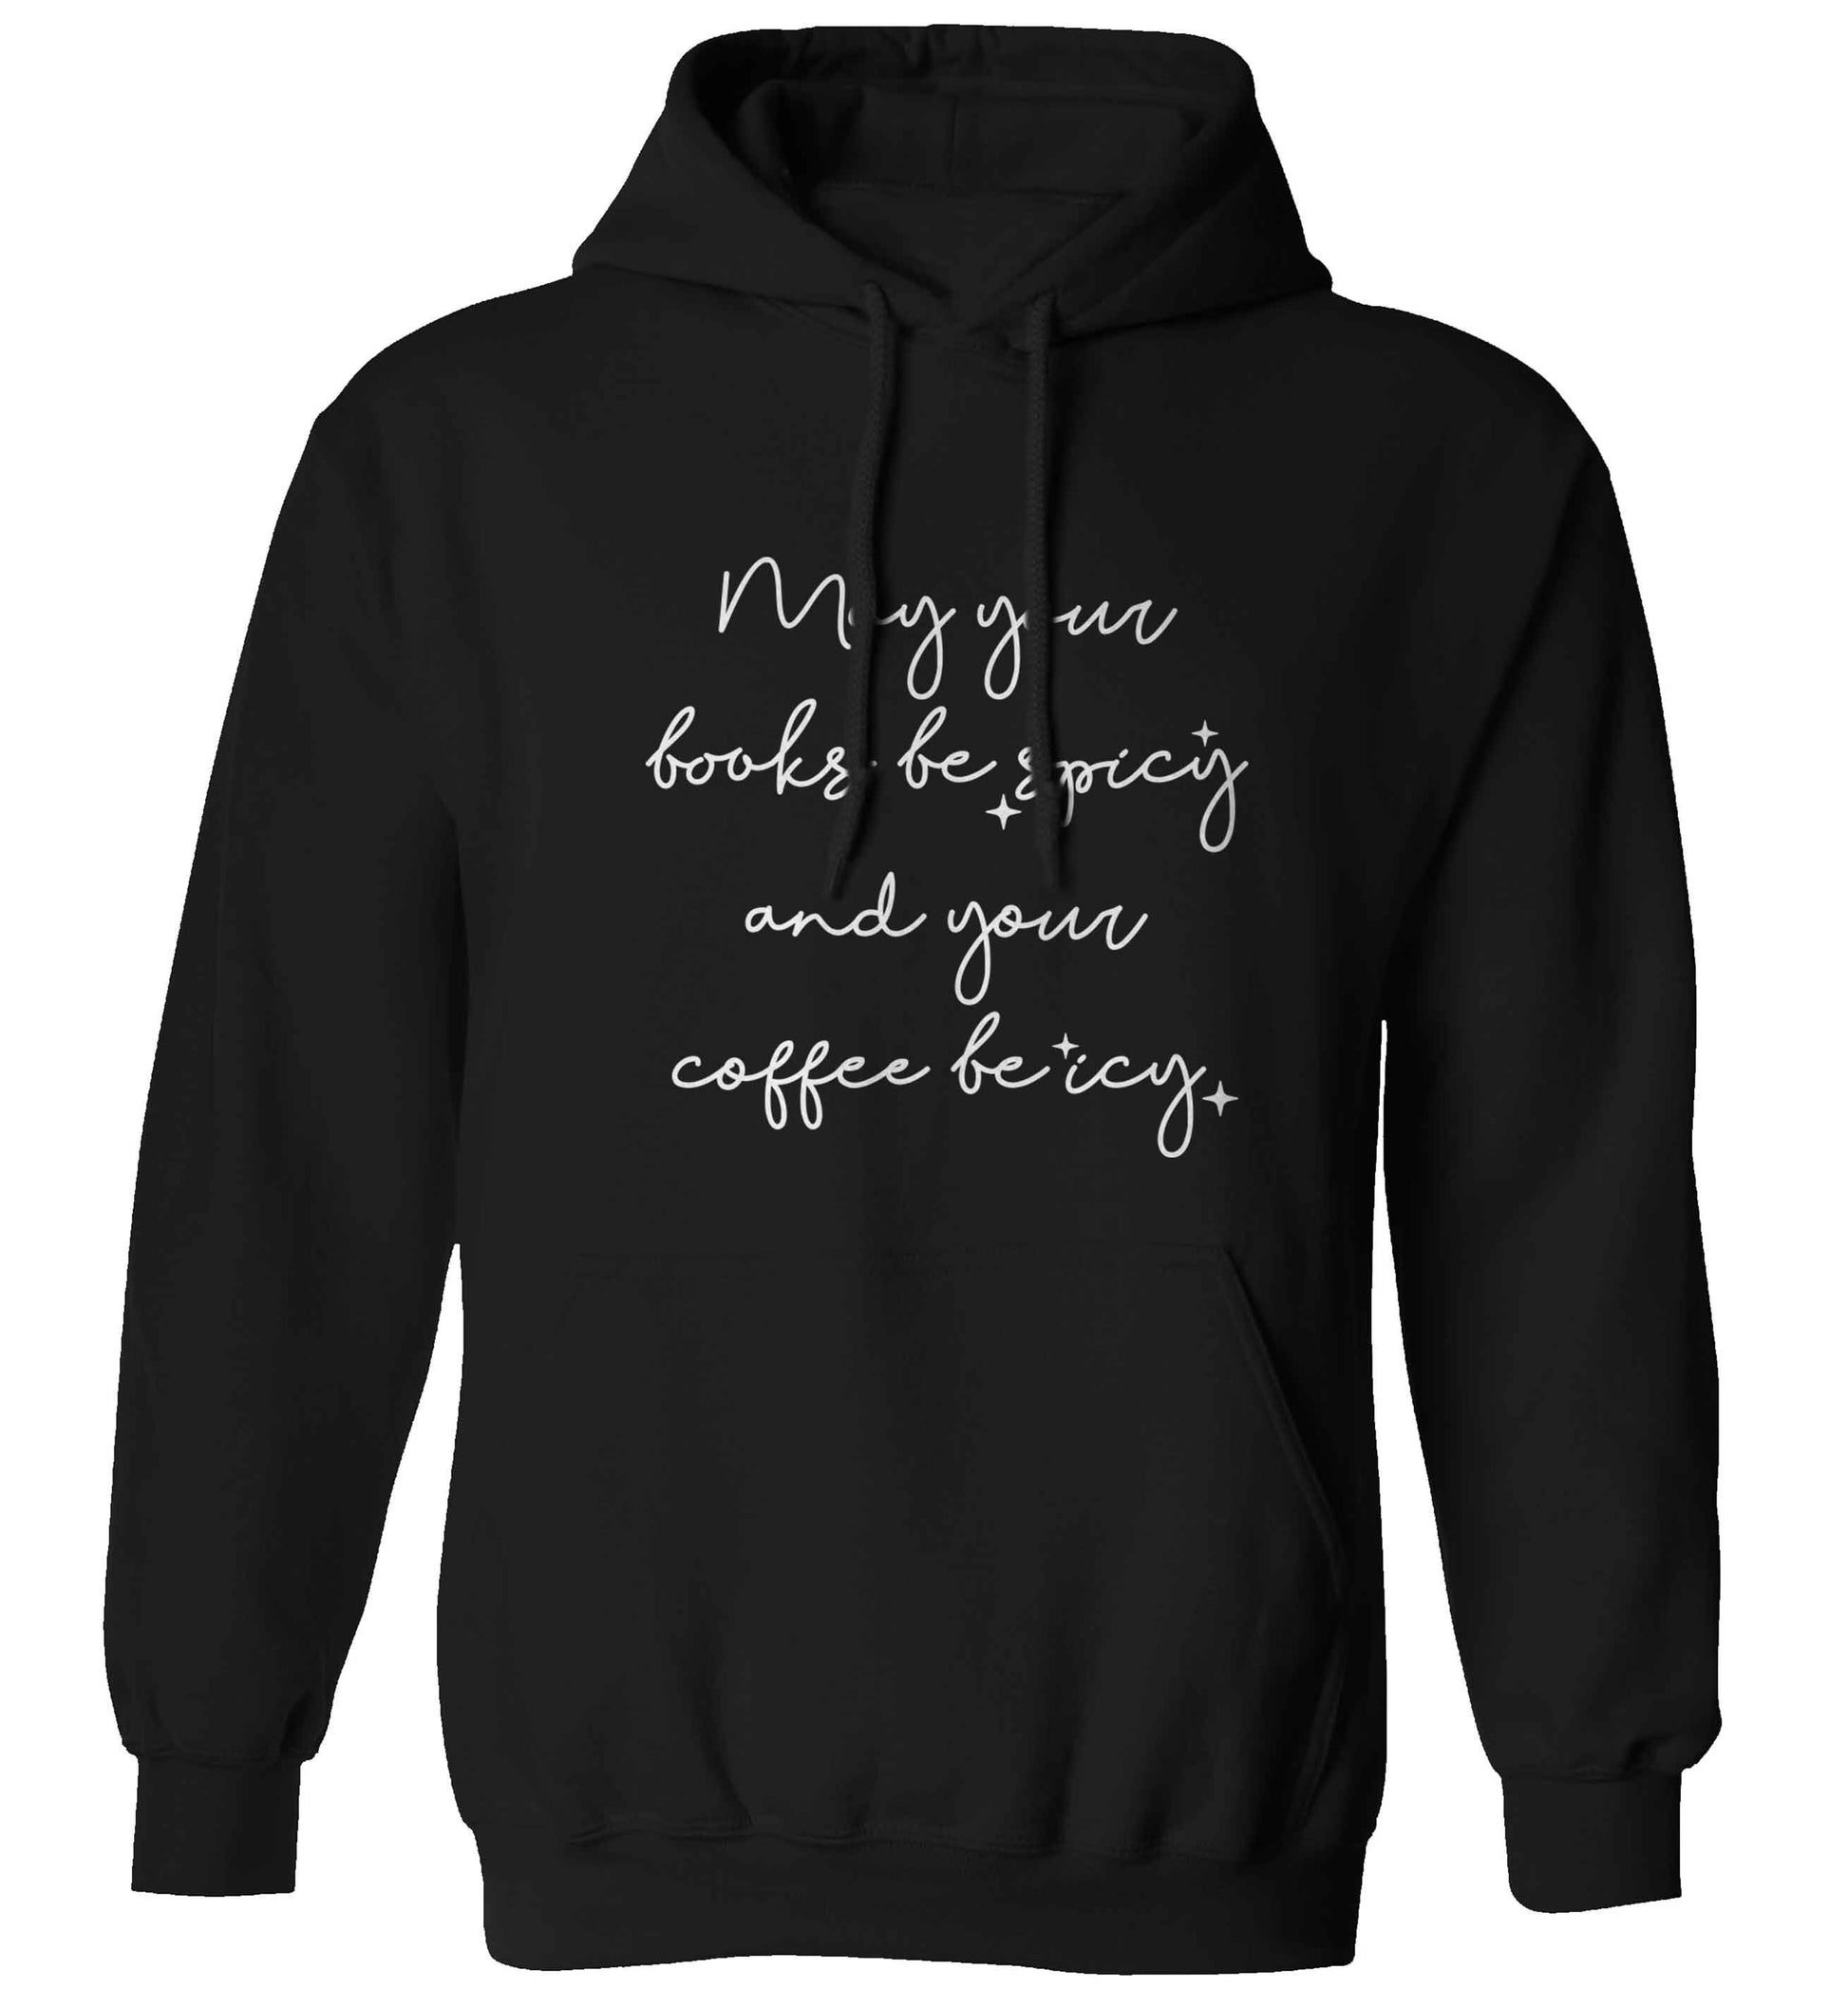 May your books be spicy and your coffee be icy adults unisex black hoodie 2XL